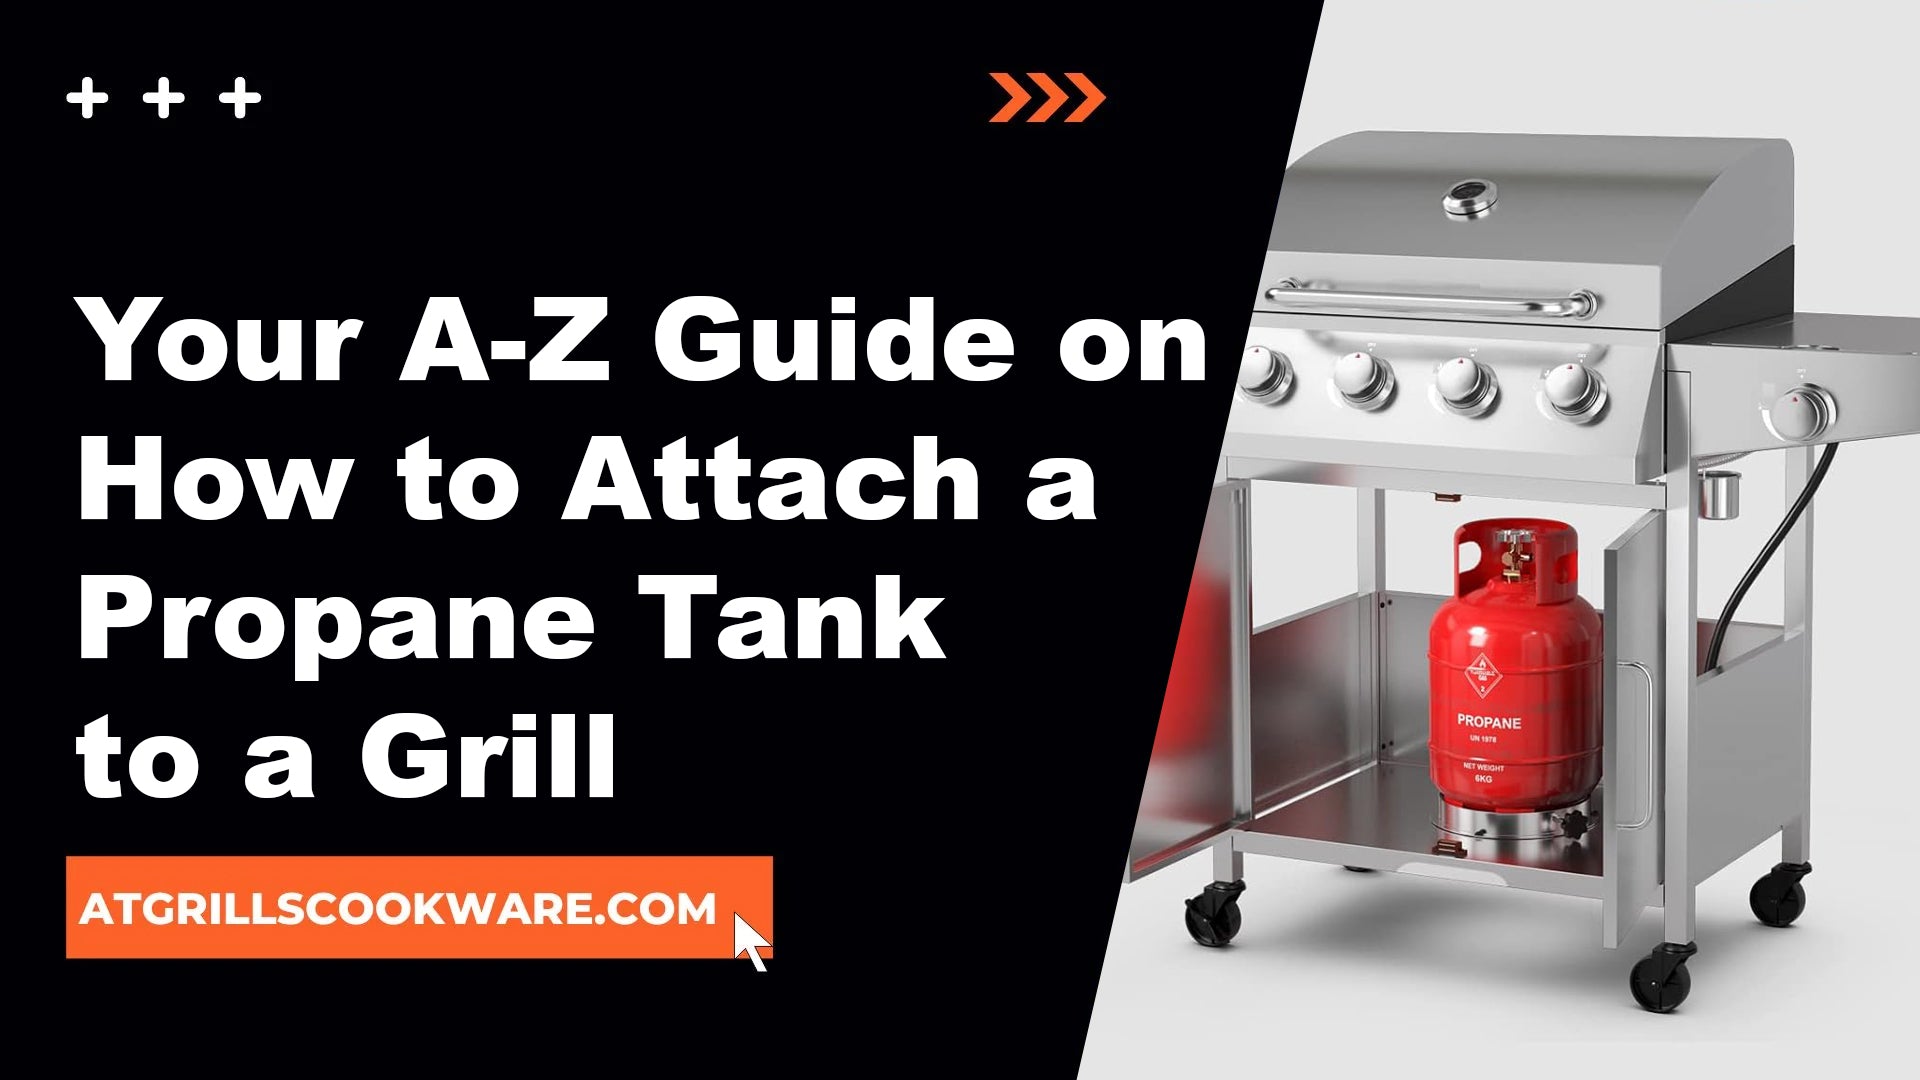 The Propane Prodigy: Your Complete Alphabetical Guide on Attaching a Propane Tank to a Grill